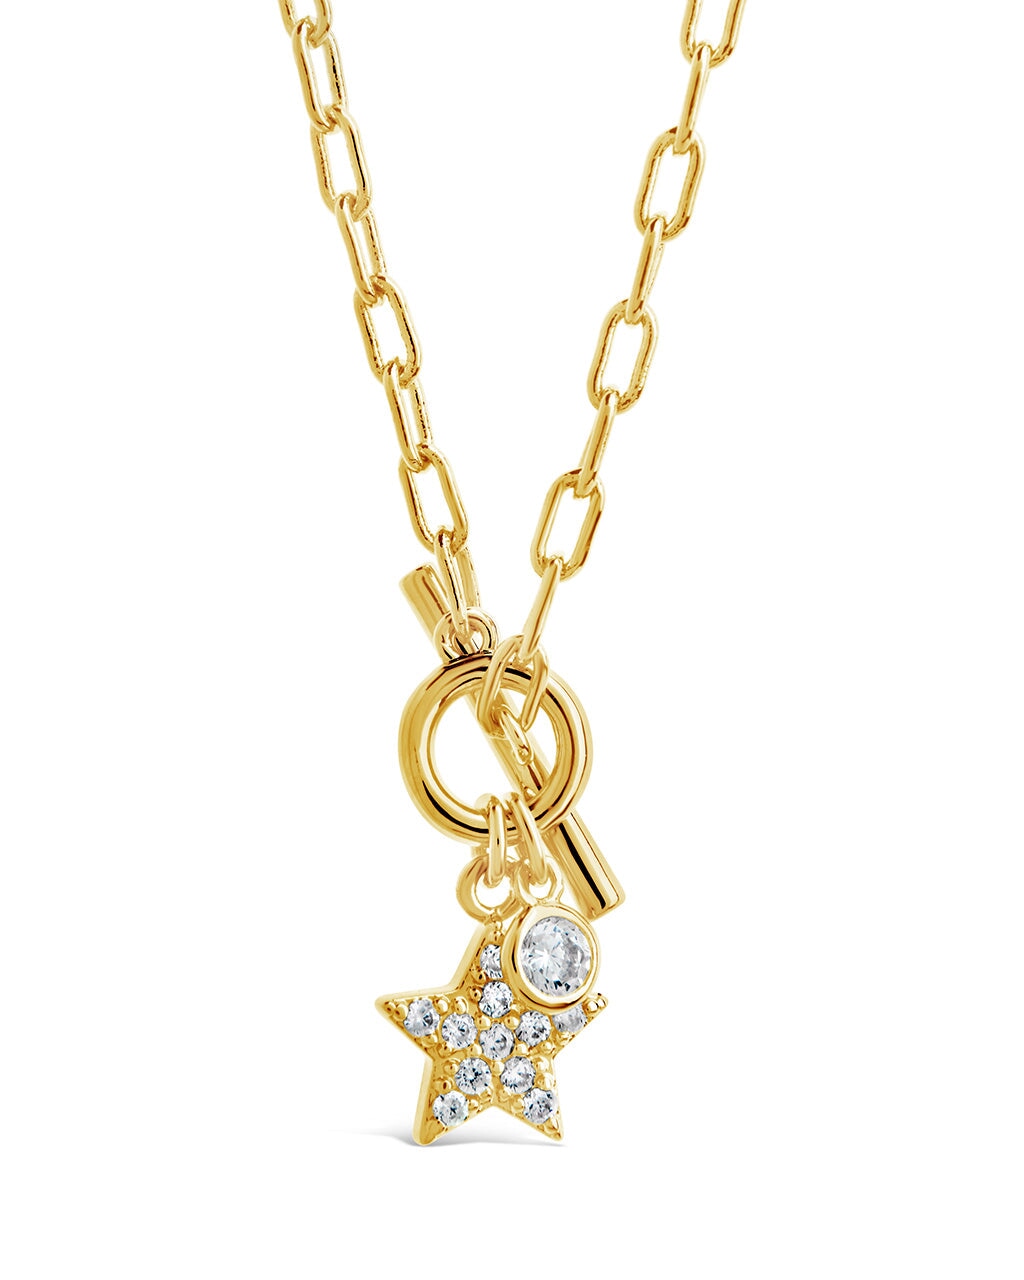 Norah Star & Toggle Necklace Necklace Sterling Forever Gold 